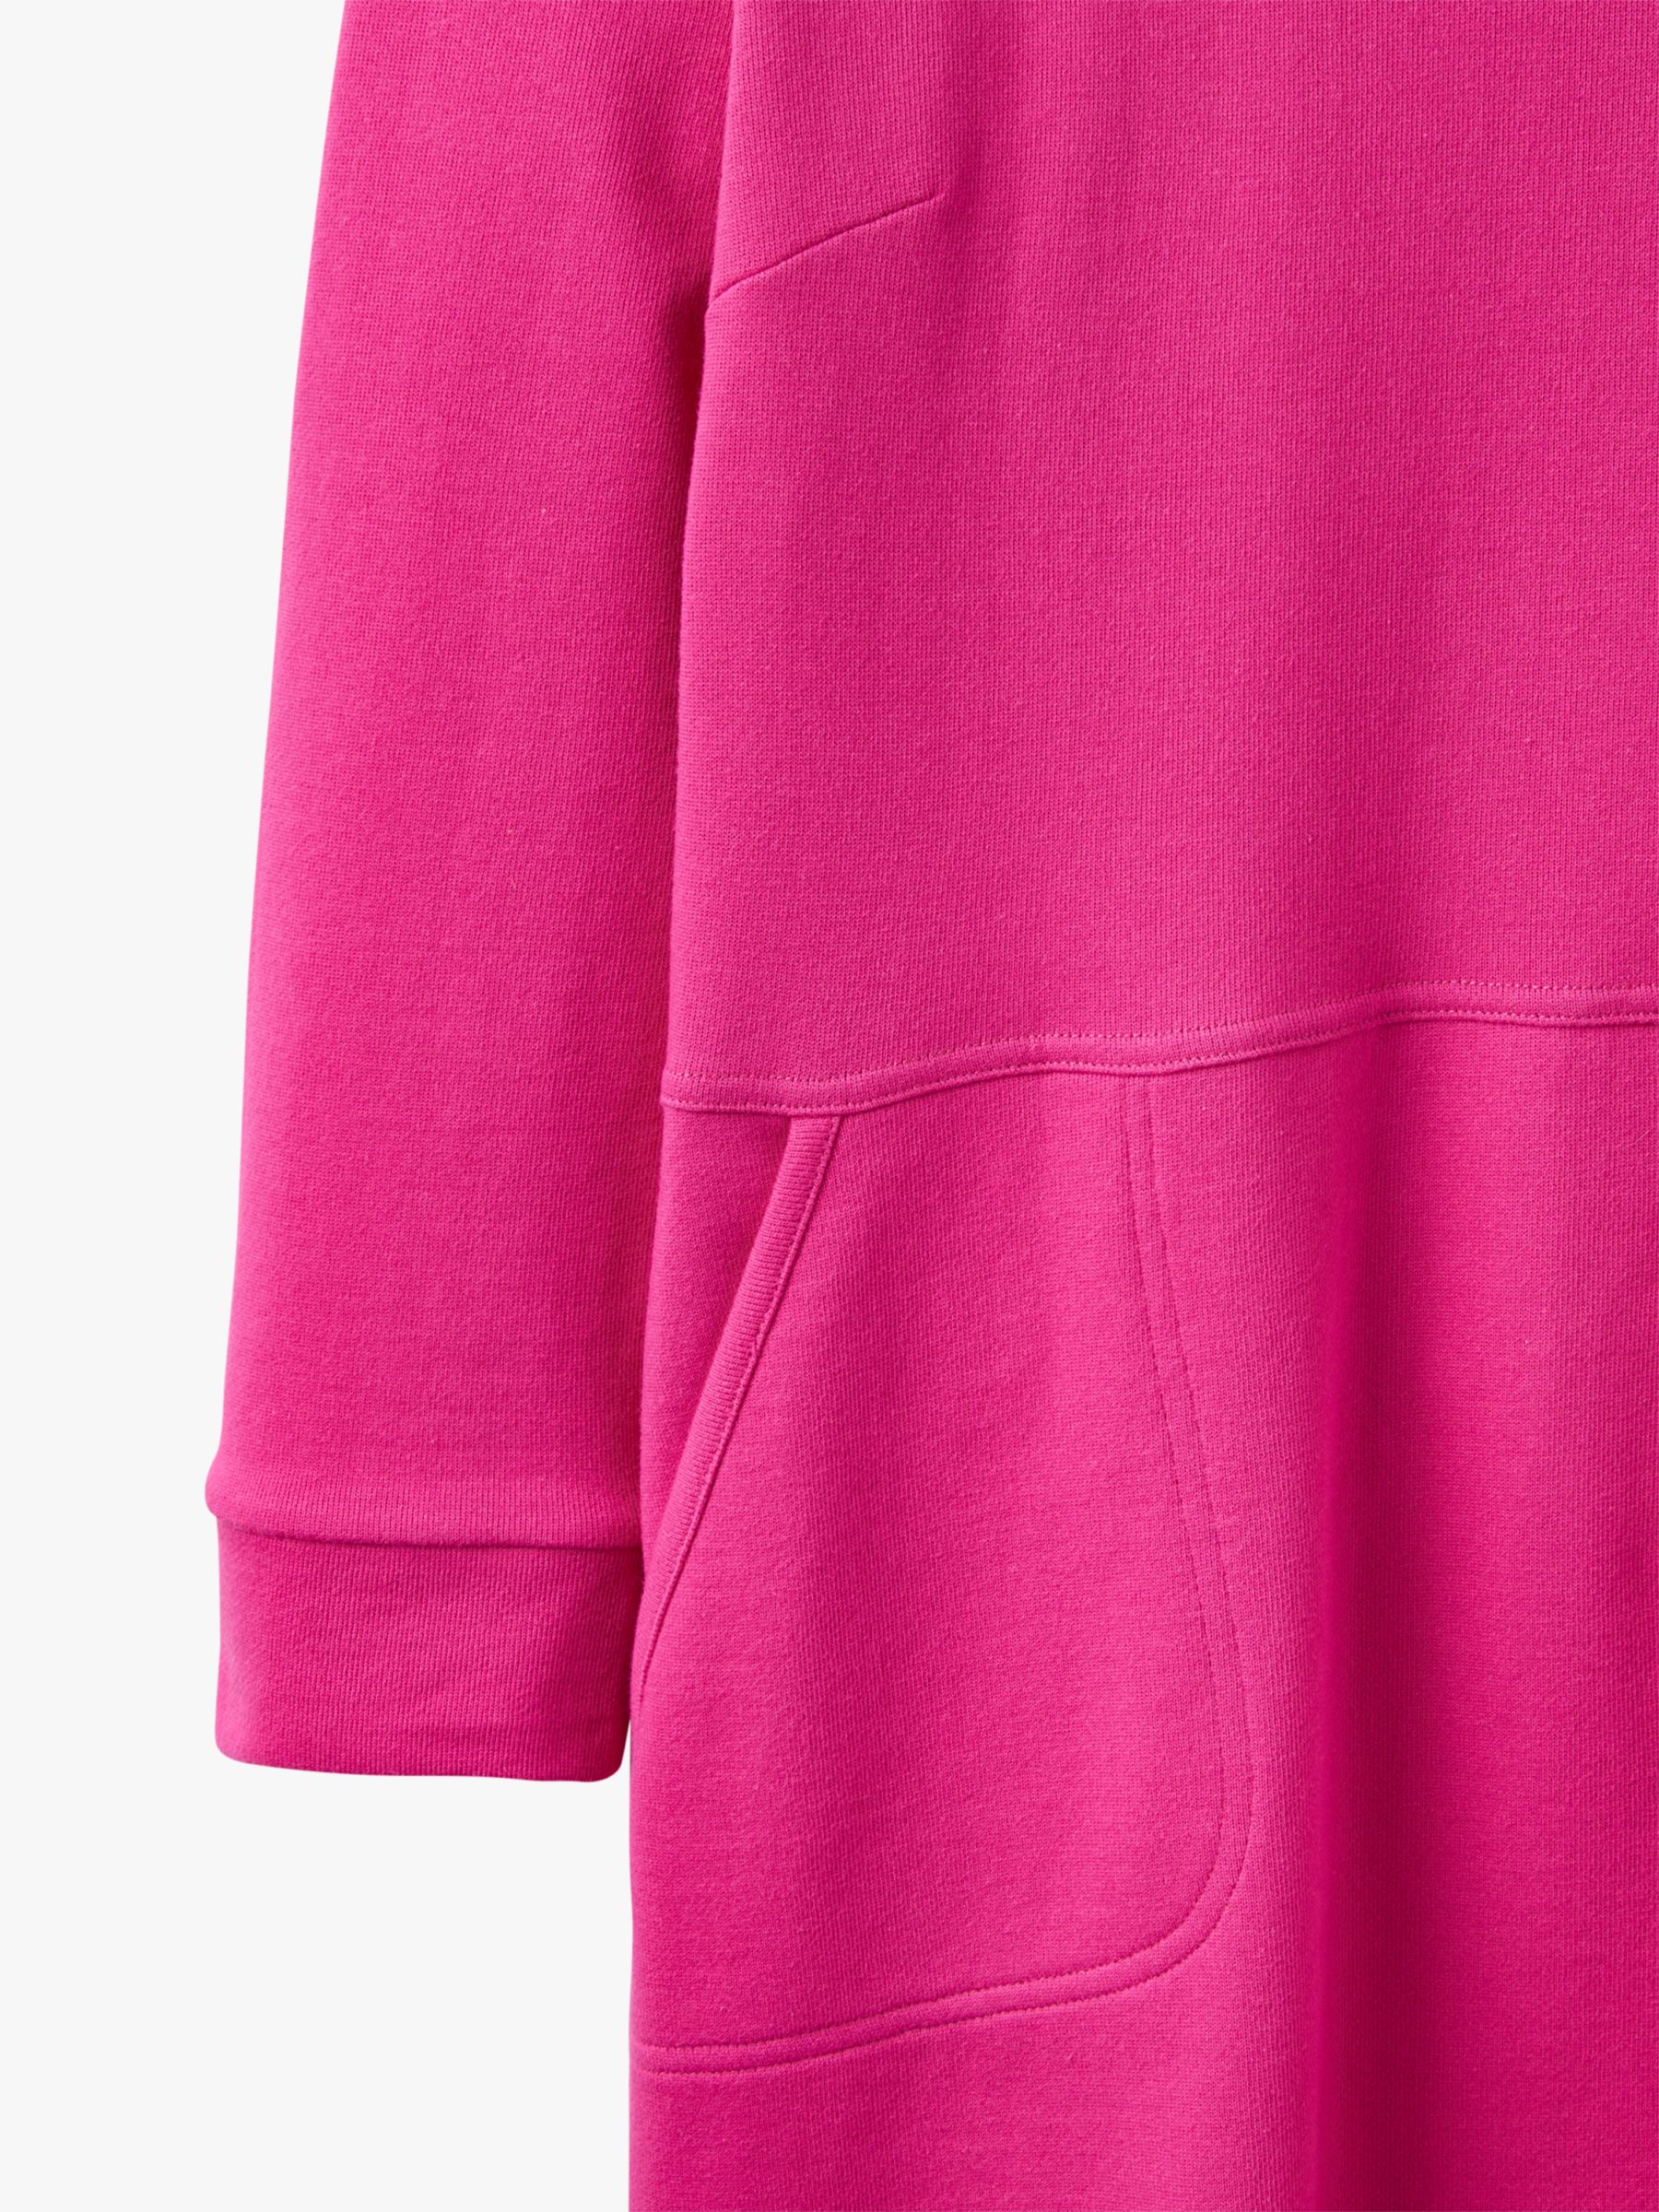 Joules Valo Jersey Dress, Pink